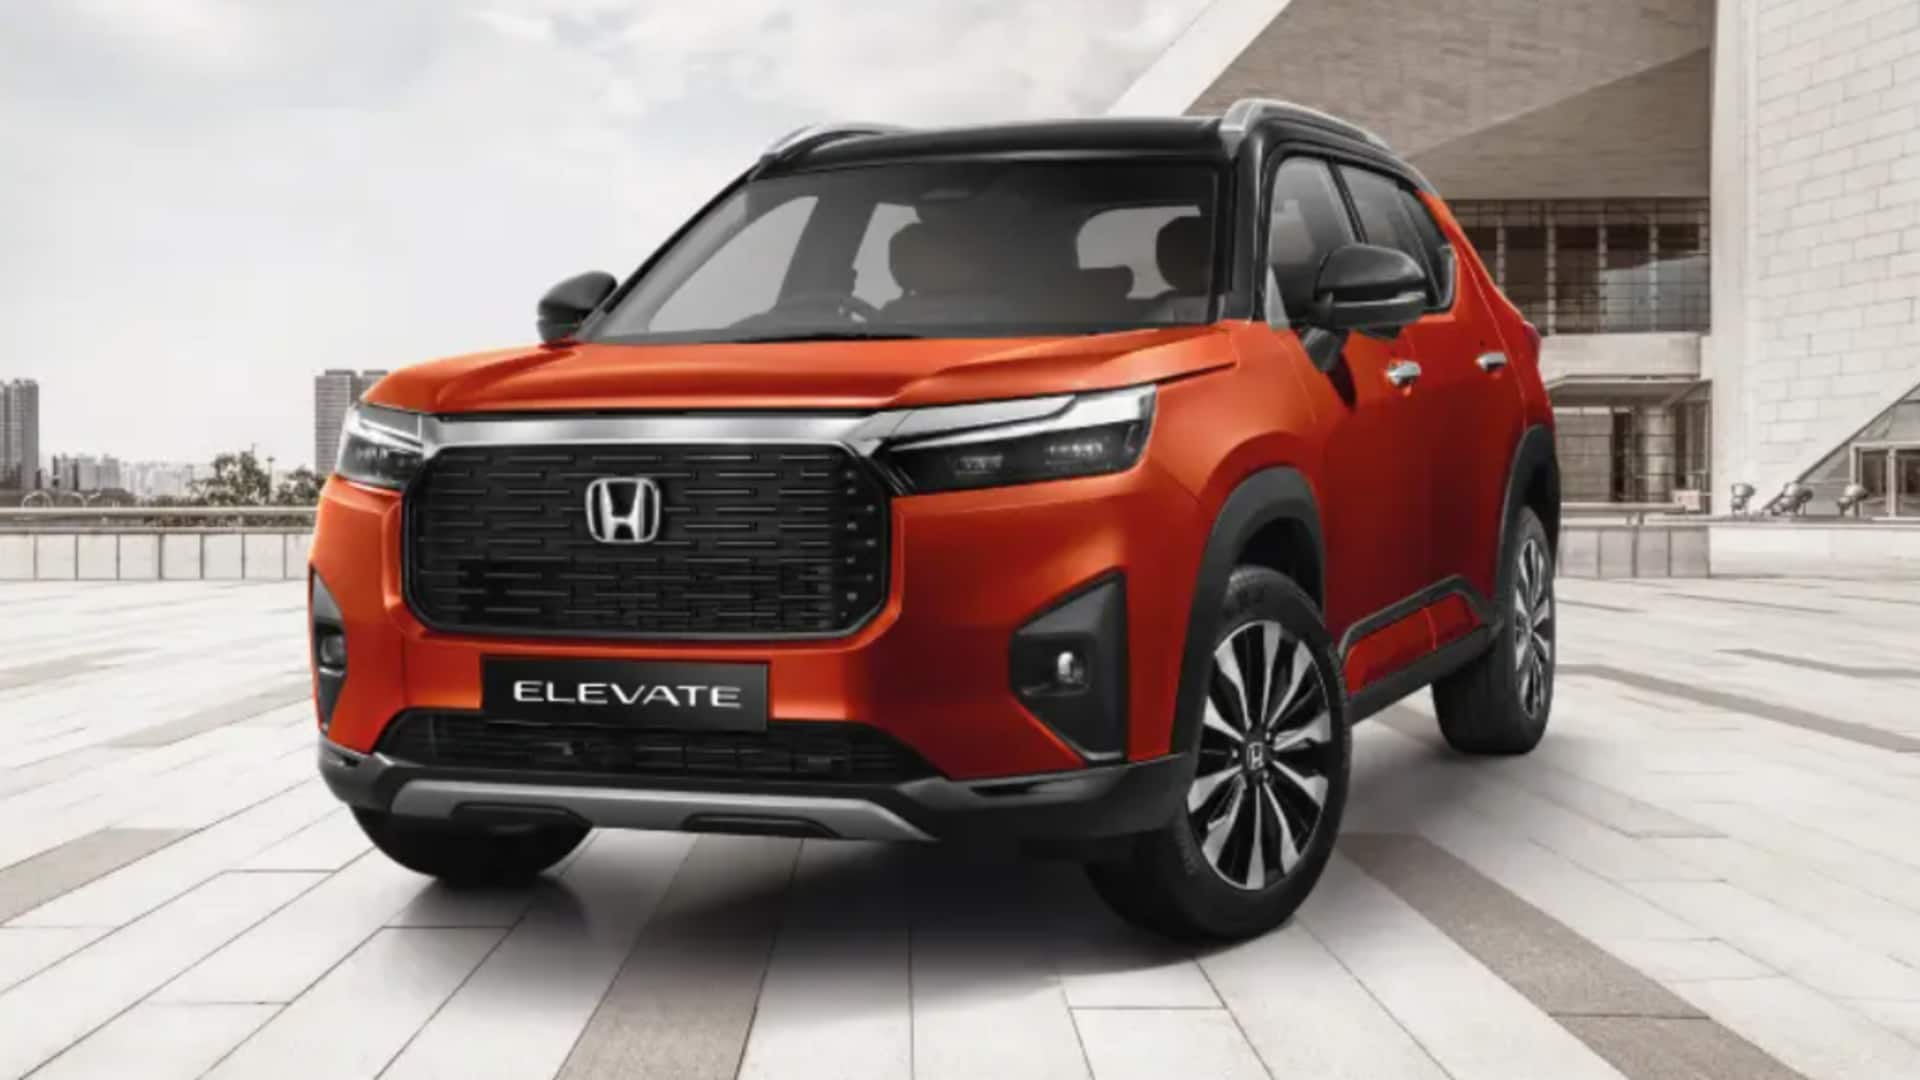 Honda unveils made-in-India Elevate SUV as new-generation WR-V in Japan